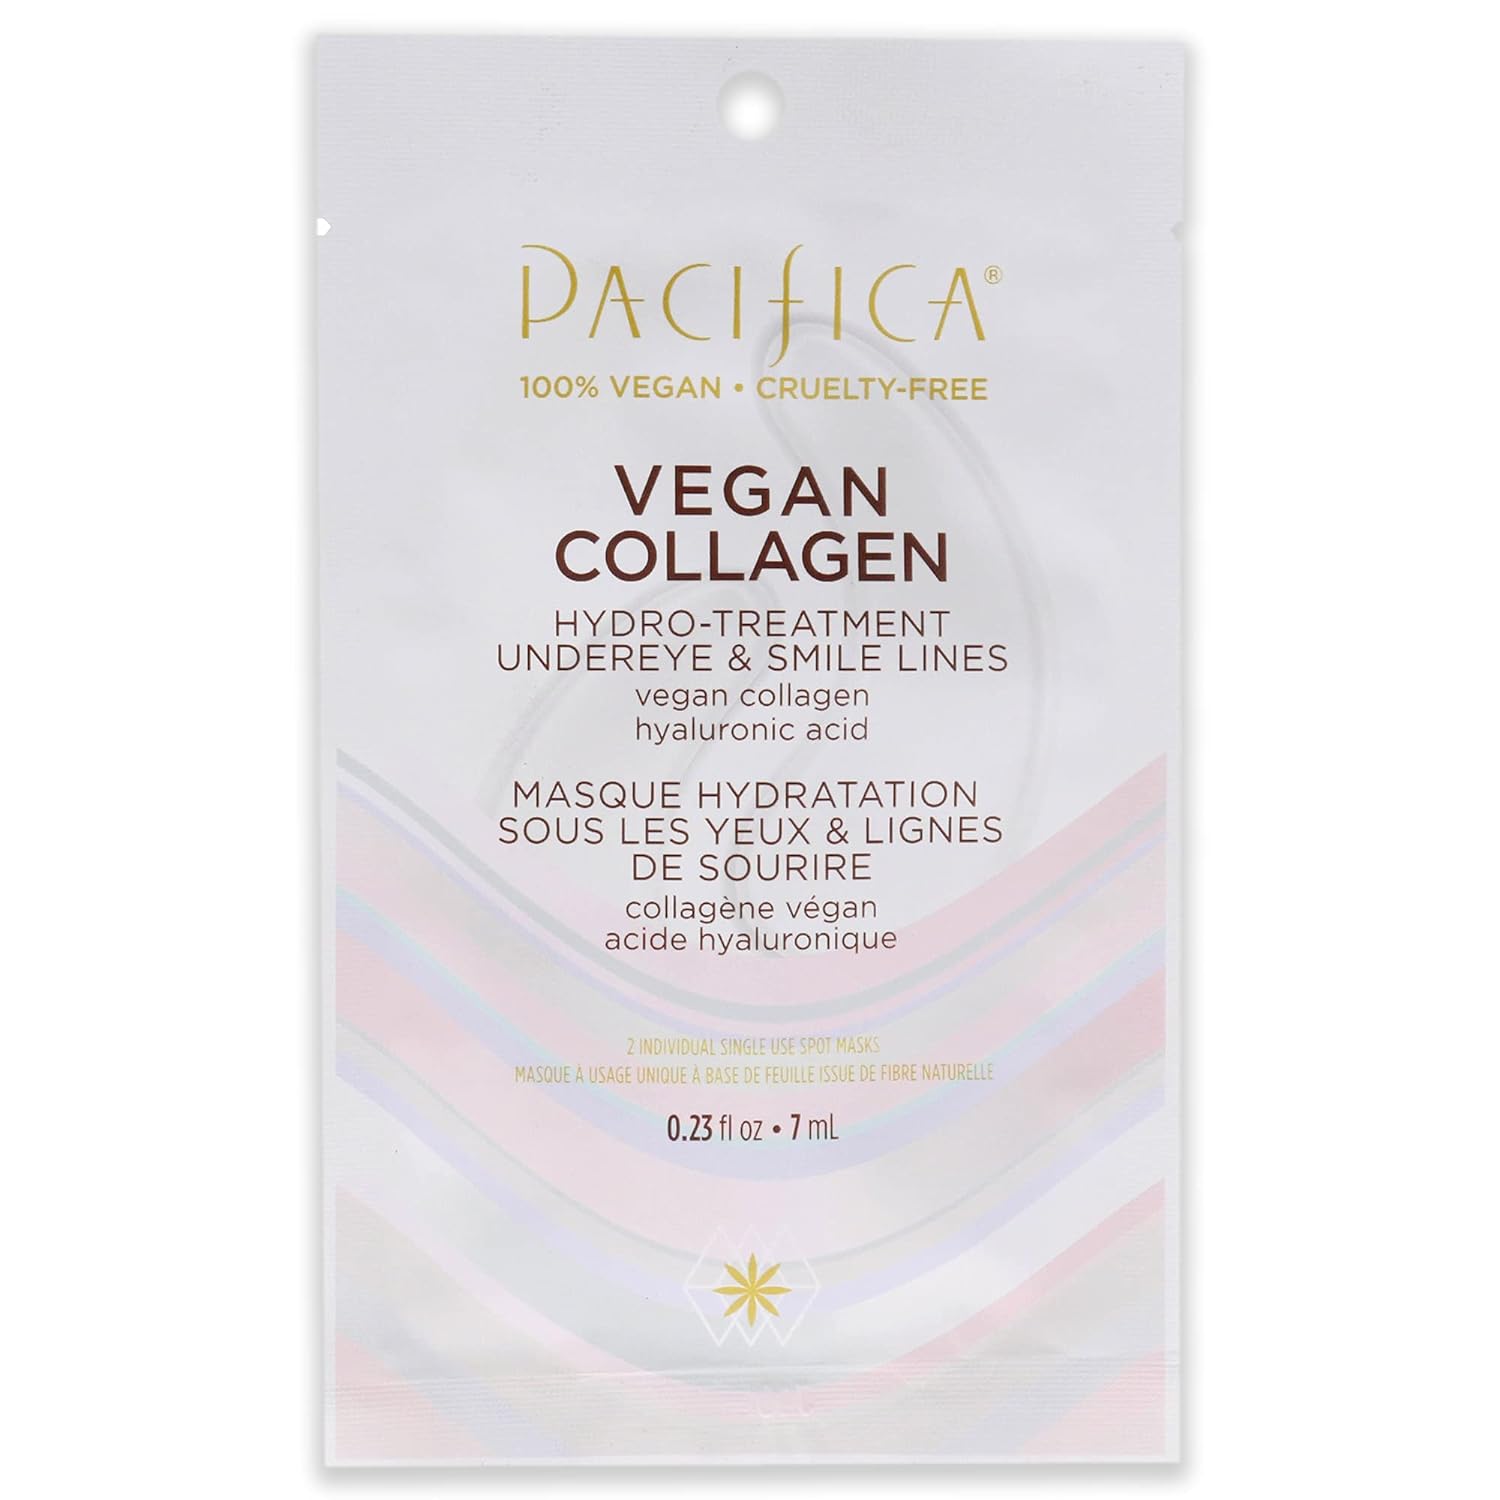 Pacifica Vegan Collagen Hydro-Treatment Undereye and Smile Lines 0.23